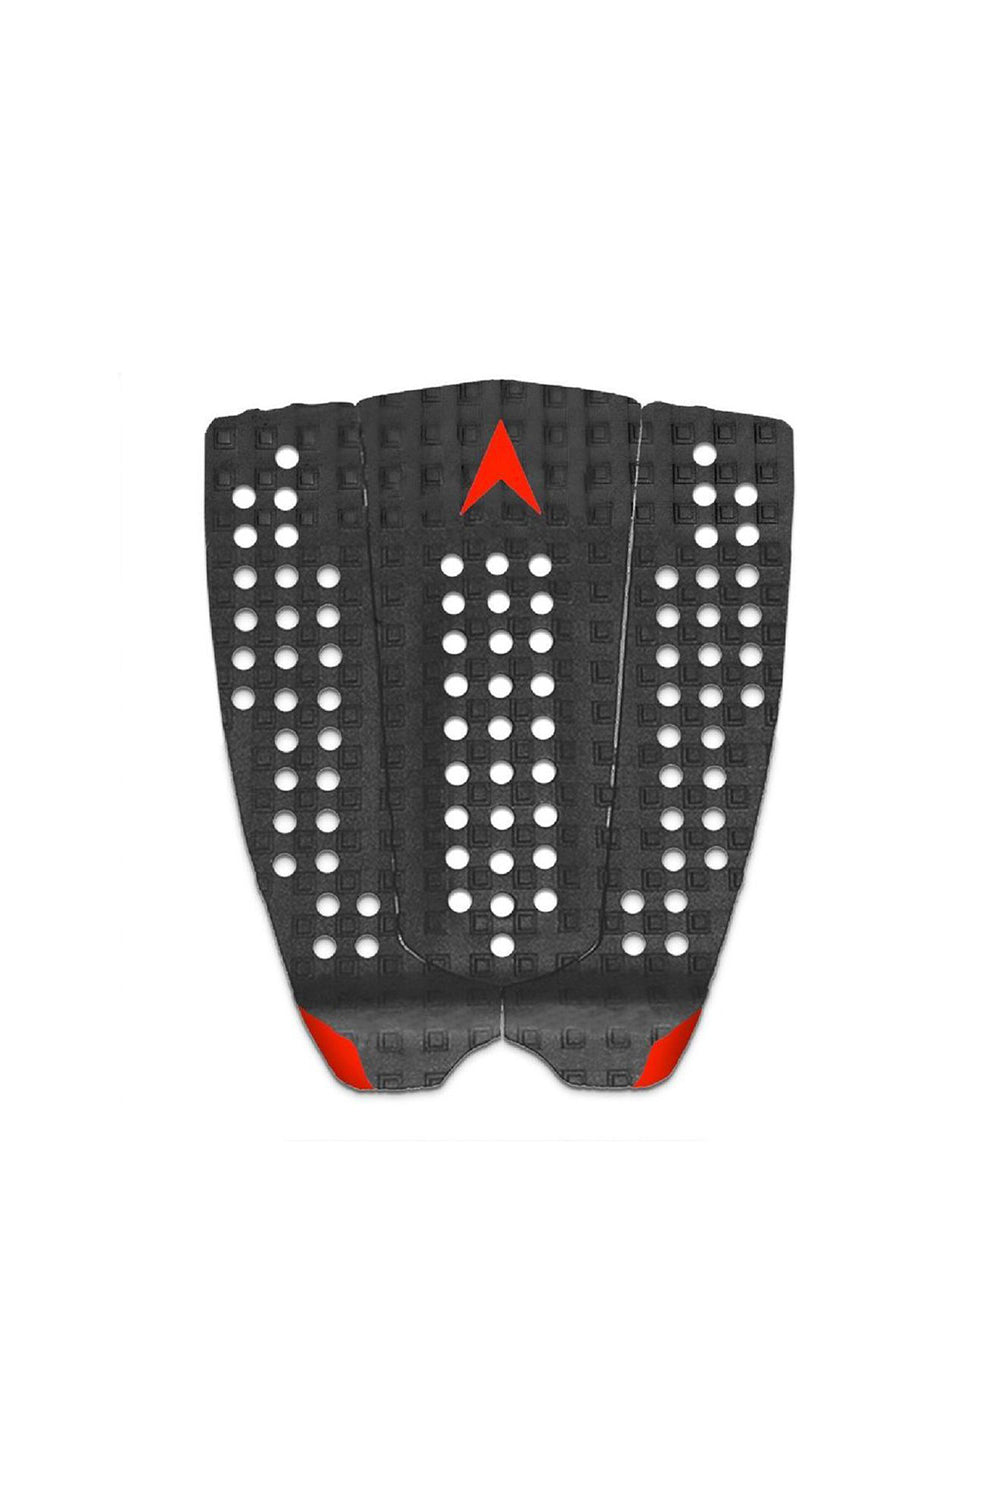 Astro Deck Flat & Fast - Black / Red Grip Pad Traction